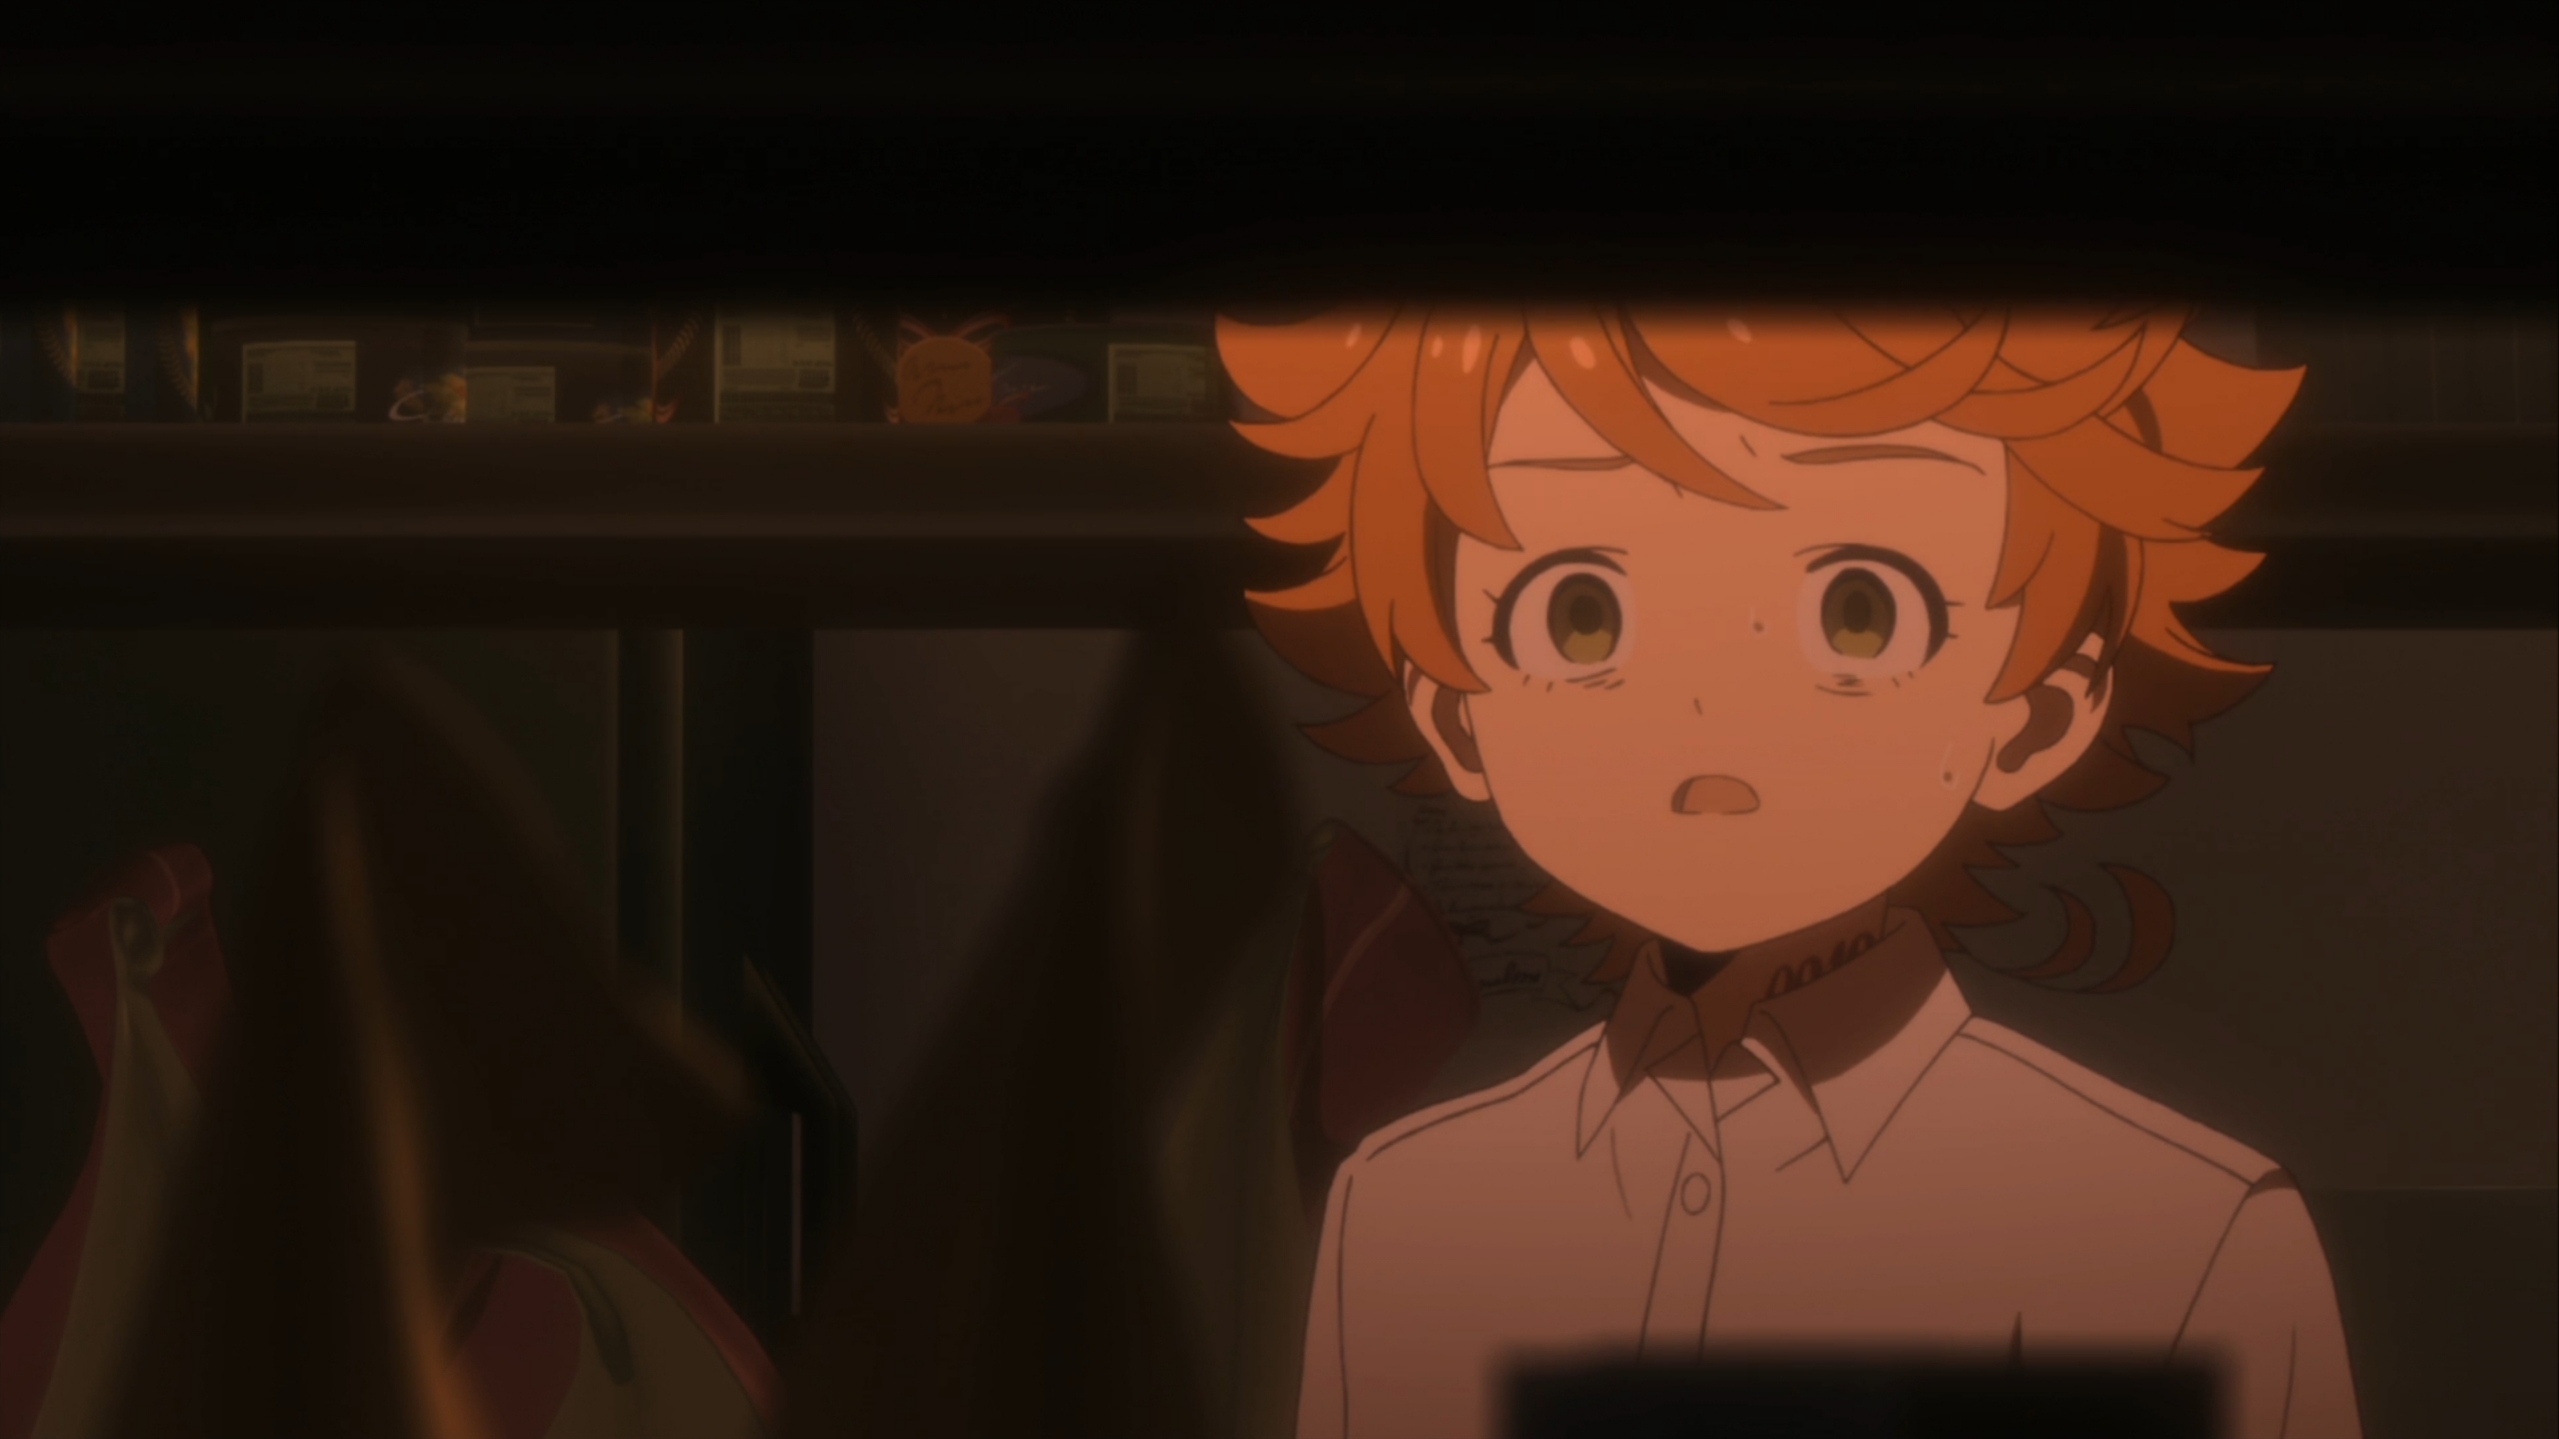 The Promised Neverland: Season 3 Release Date 